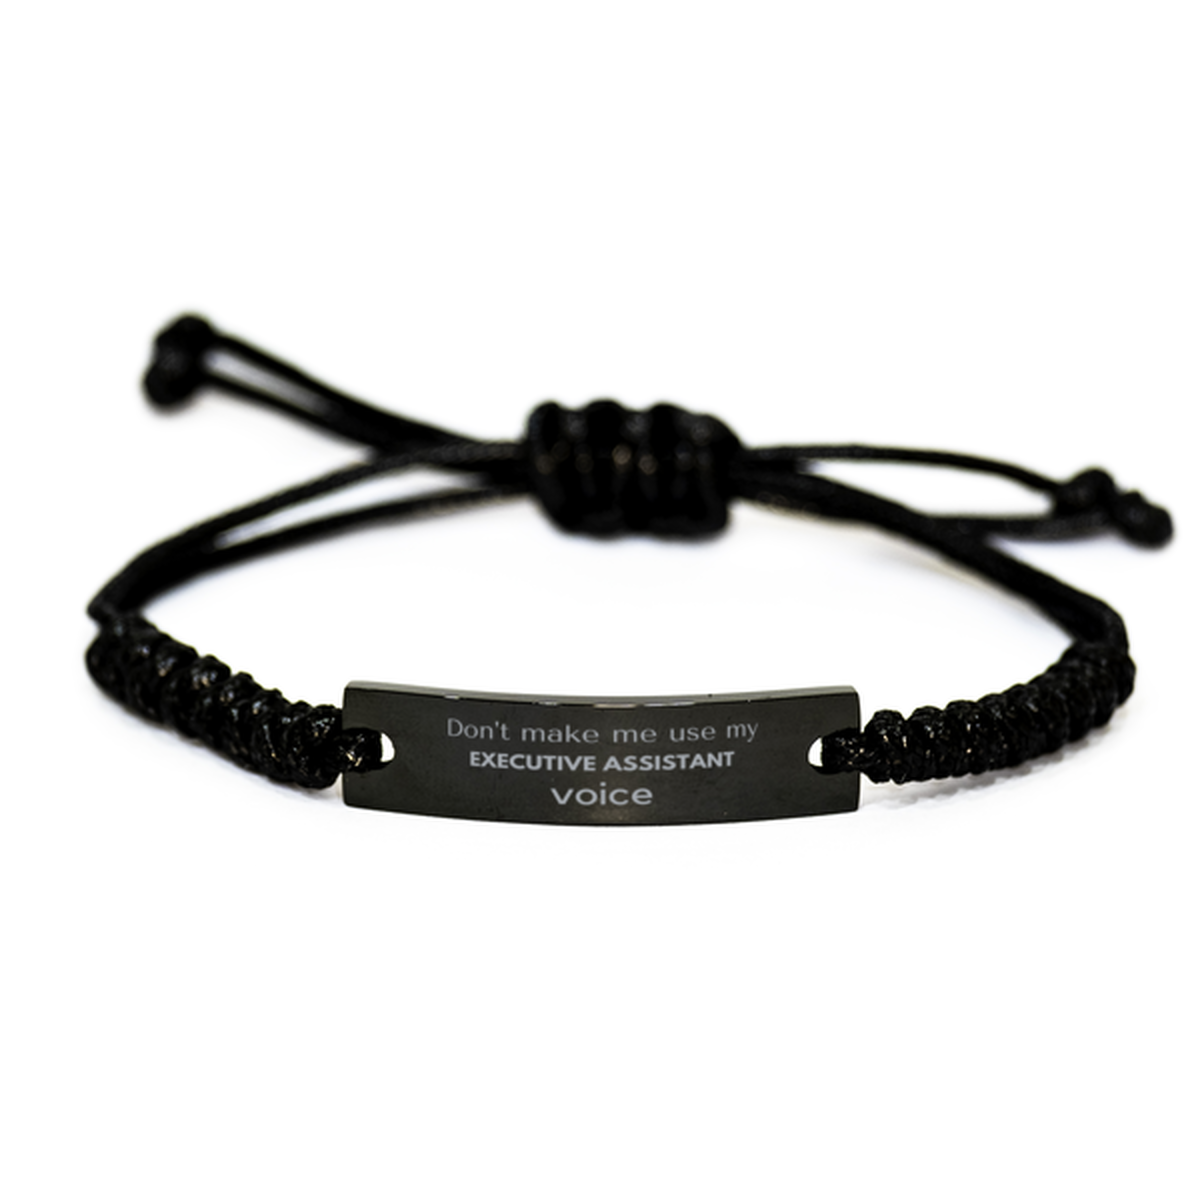 Don't make me use my Executive Assistant voice, Sarcasm Executive Assistant Gifts, Christmas Executive Assistant Black Rope Bracelet Birthday Unique Gifts For Executive Assistant Coworkers, Men, Women, Colleague, Friends